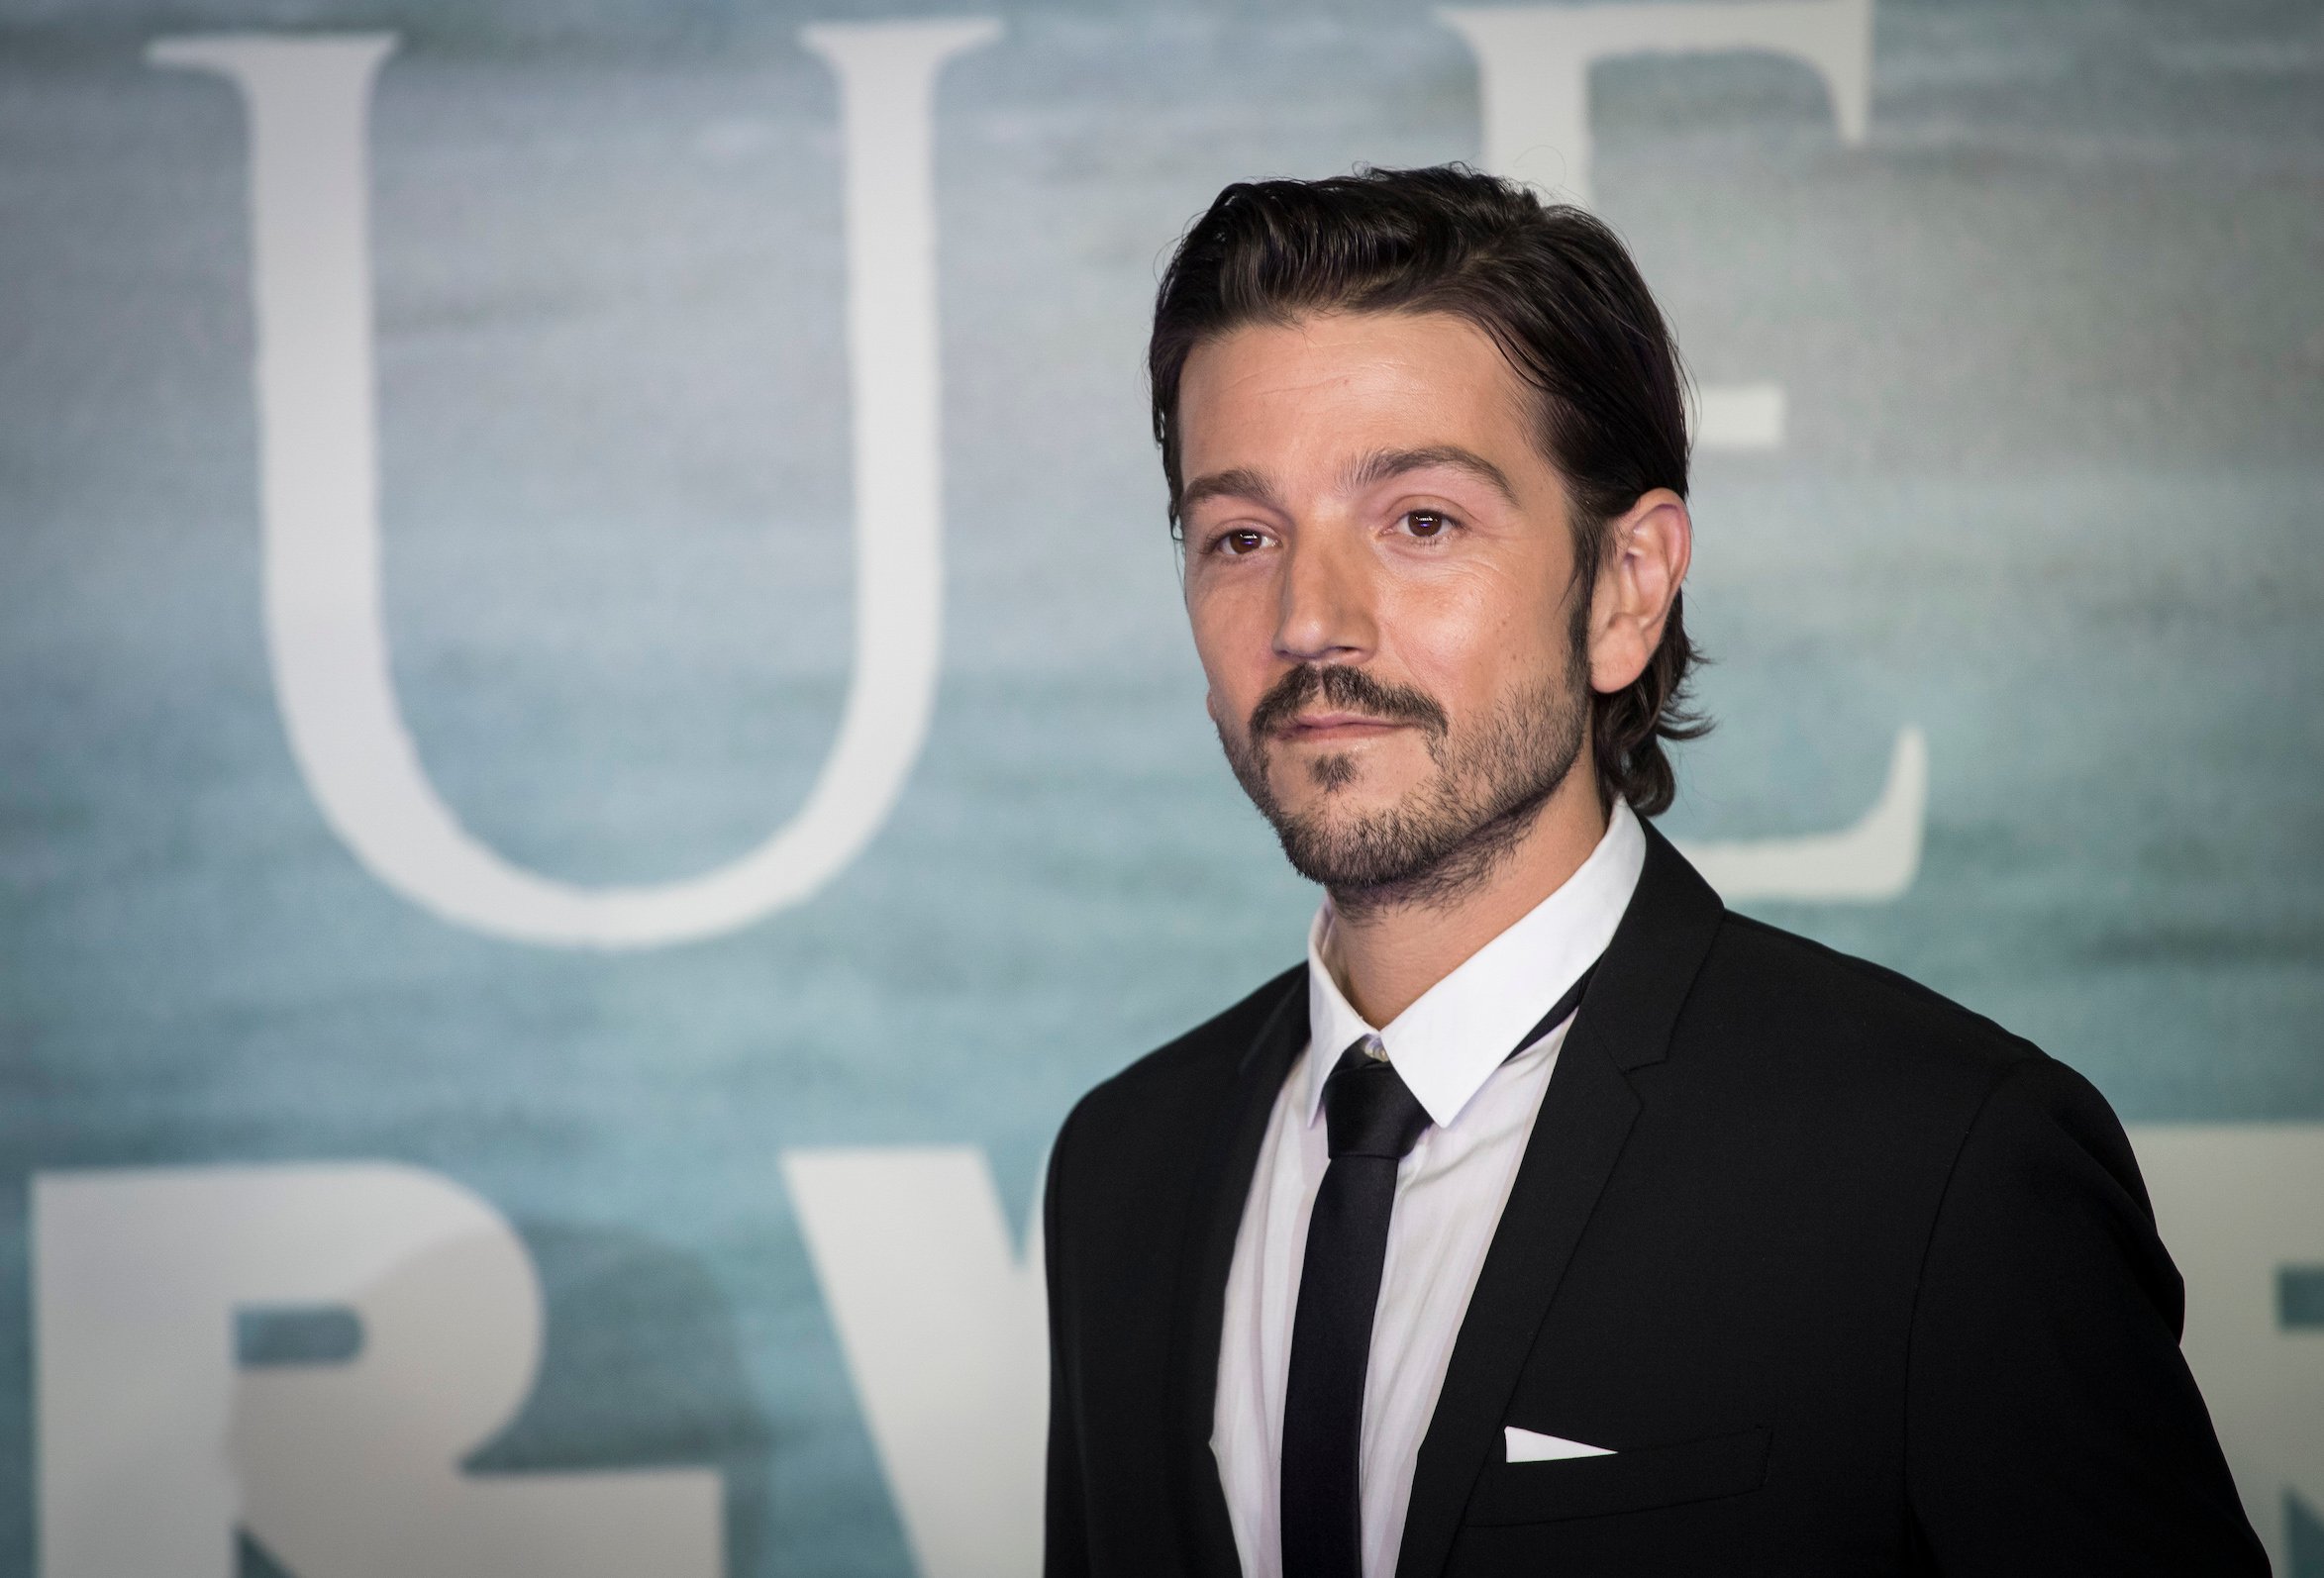 Andor actor Diego Luna attends the premiere of Rogue One in London